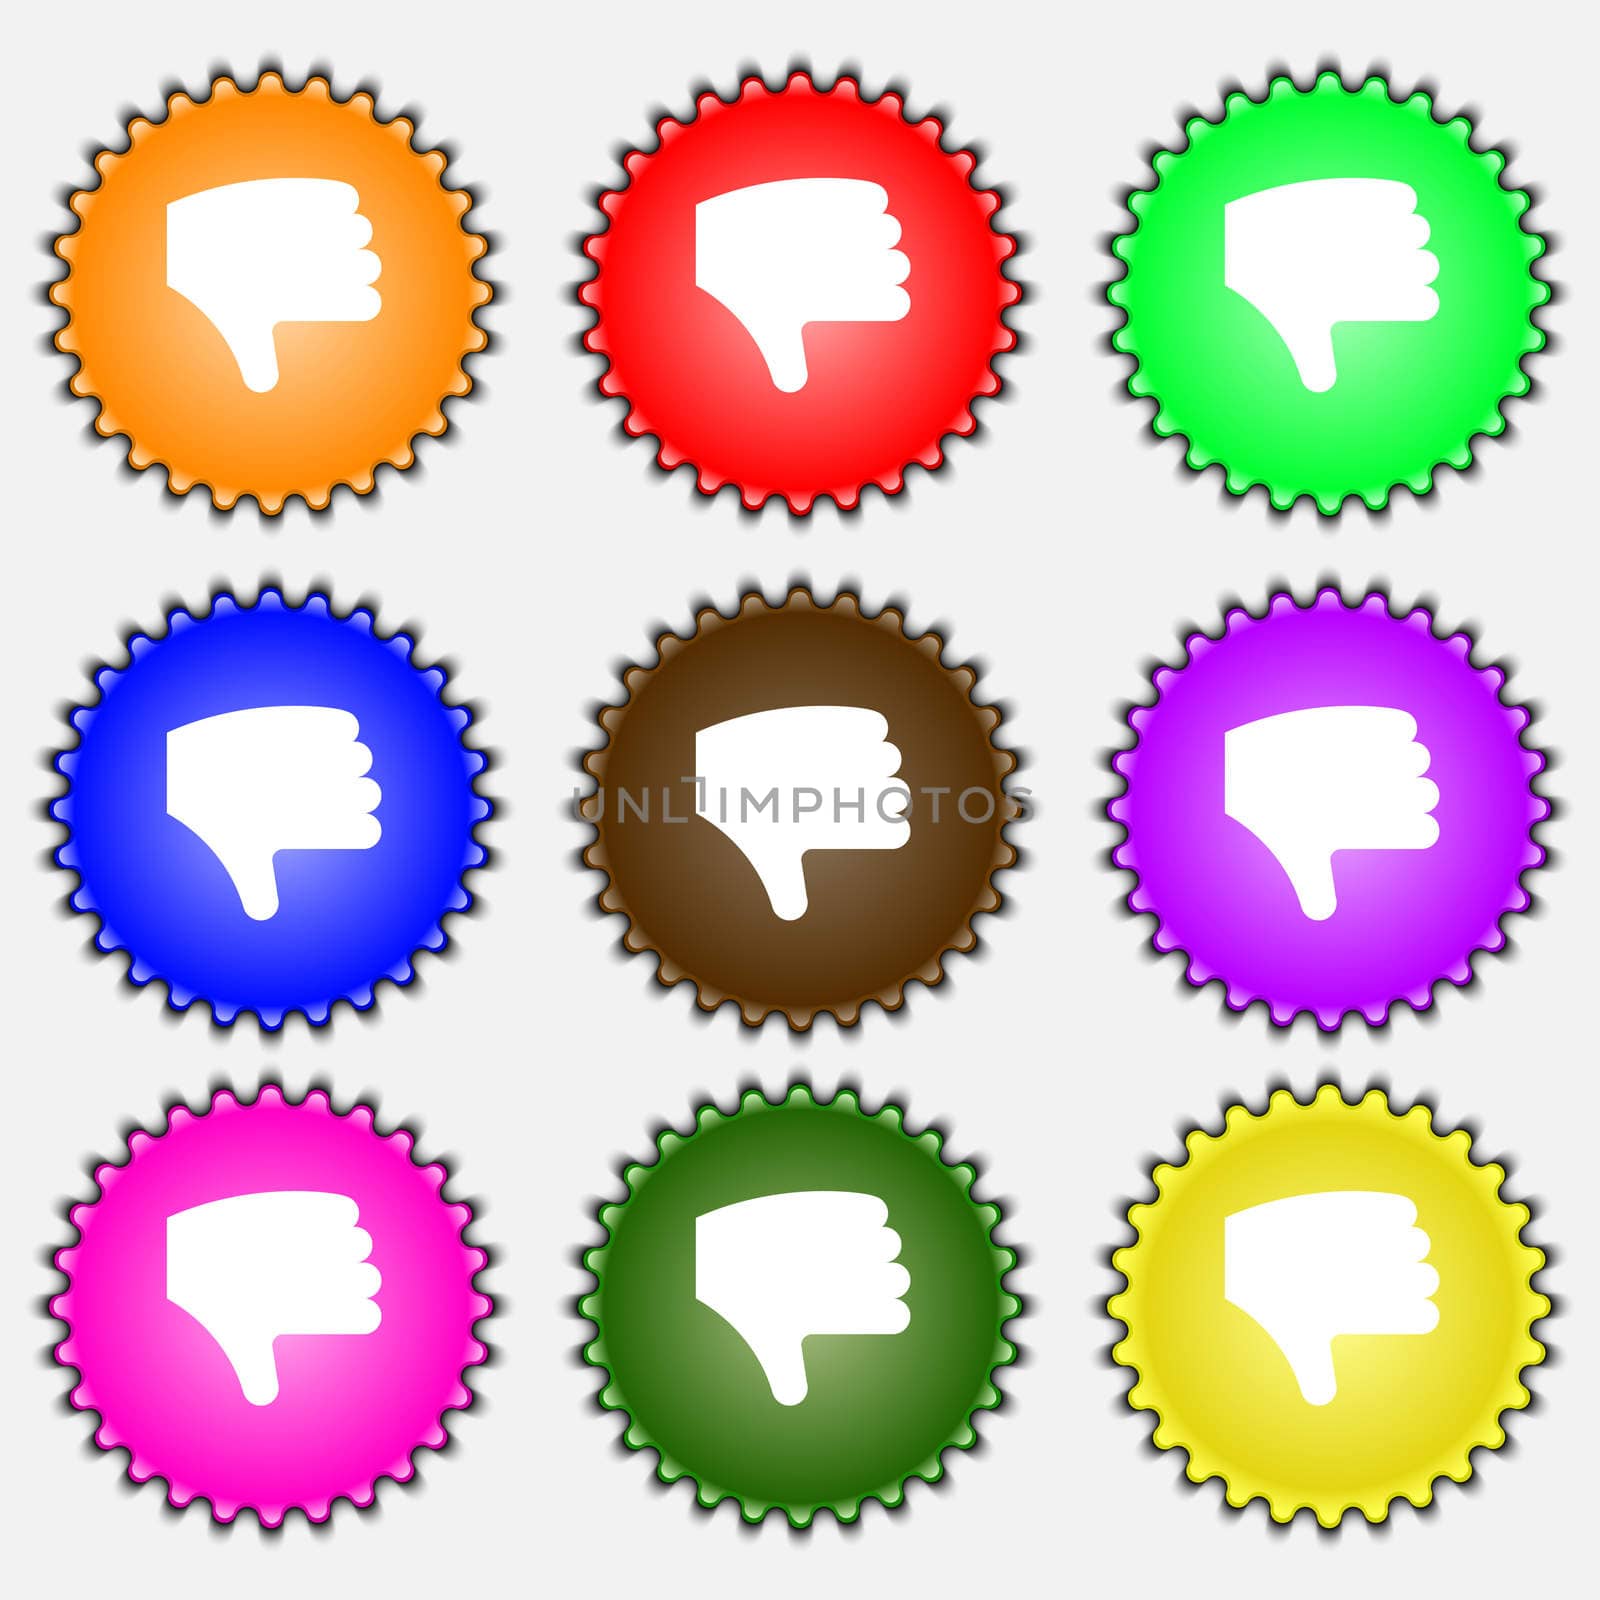 Dislike, Thumb down, Hand finger down icon sign. A set of nine different colored labels. illustration